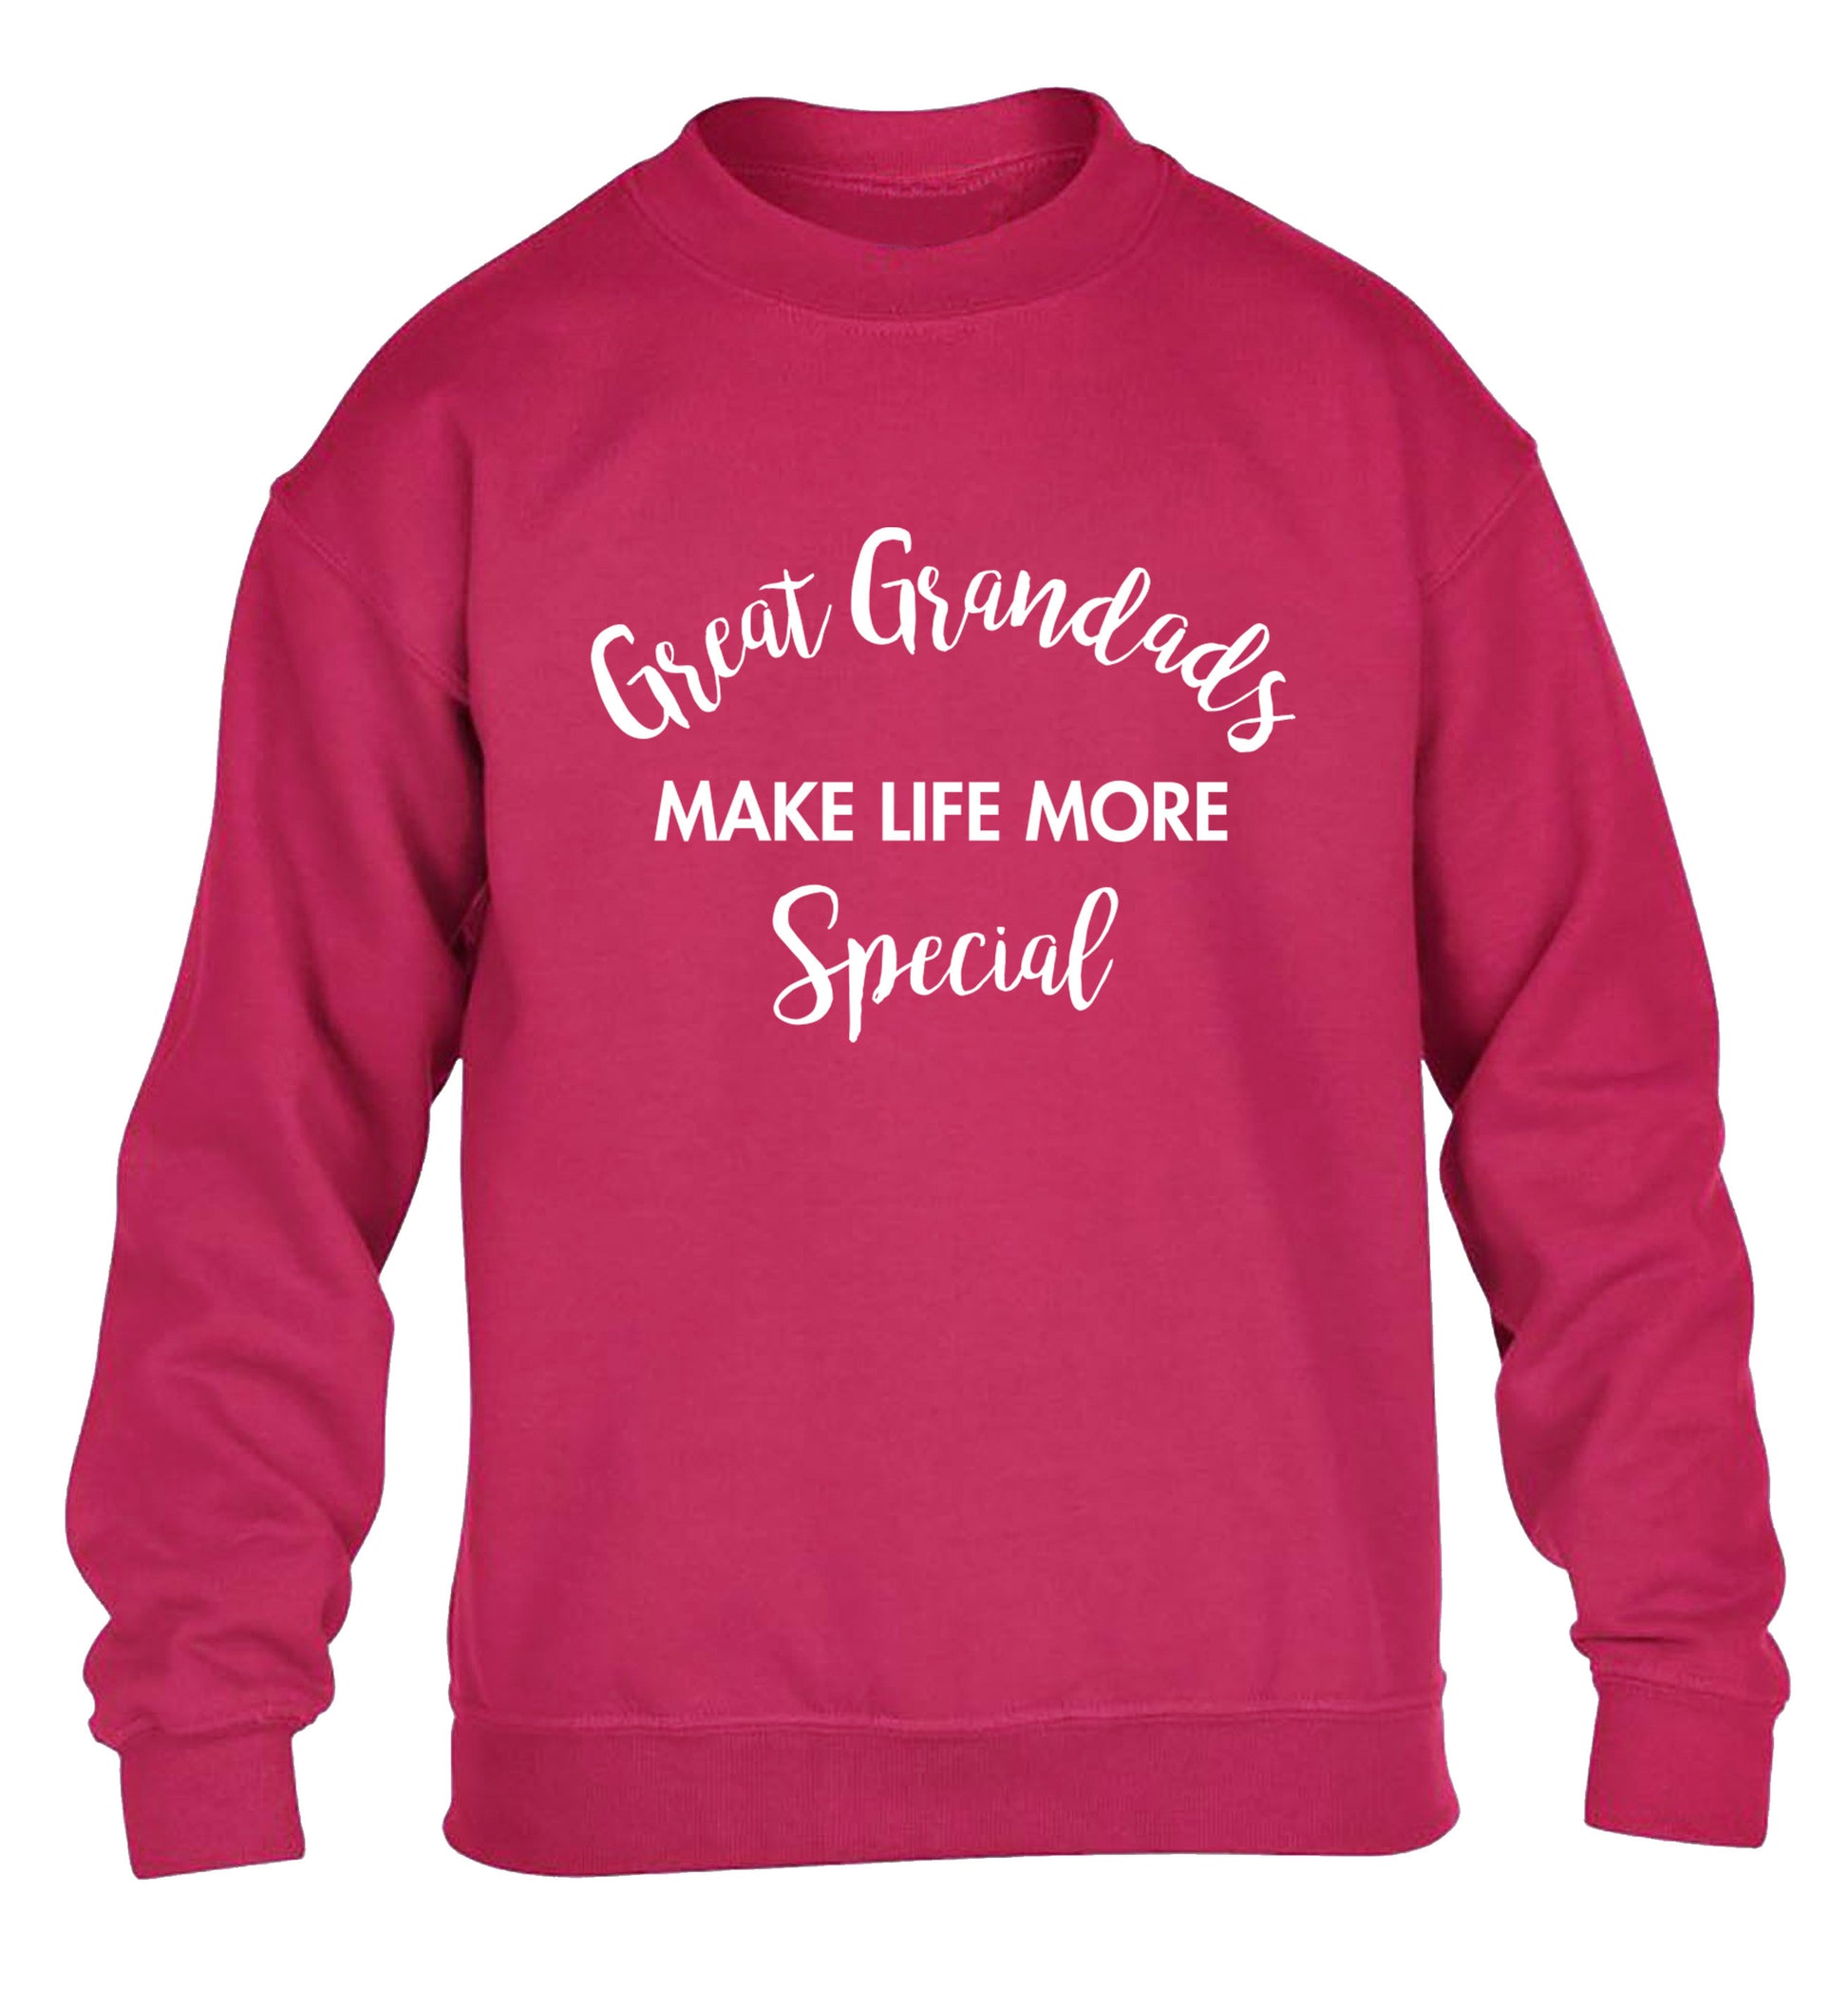 Great Grandads make life more special children's pink sweater 12-14 Years